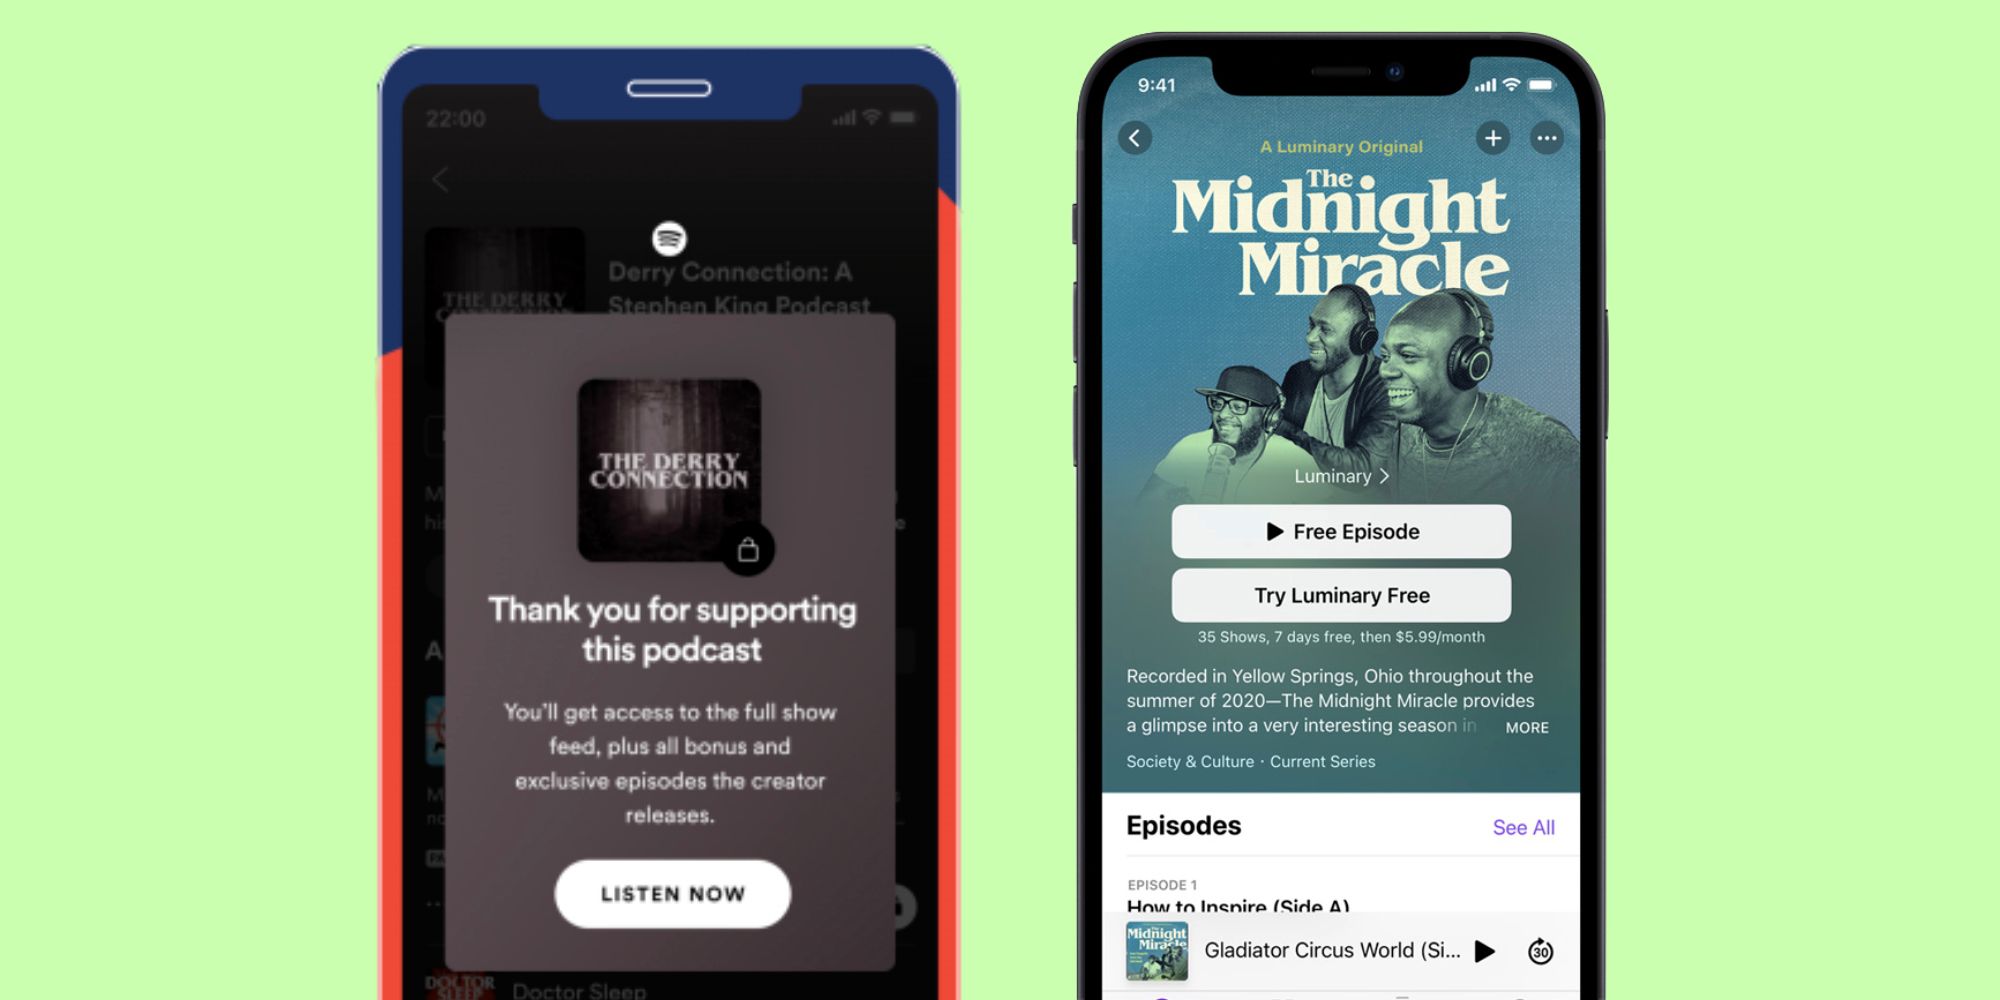 Paid podcasts subscriptions on Spotify and Apple Podcasts